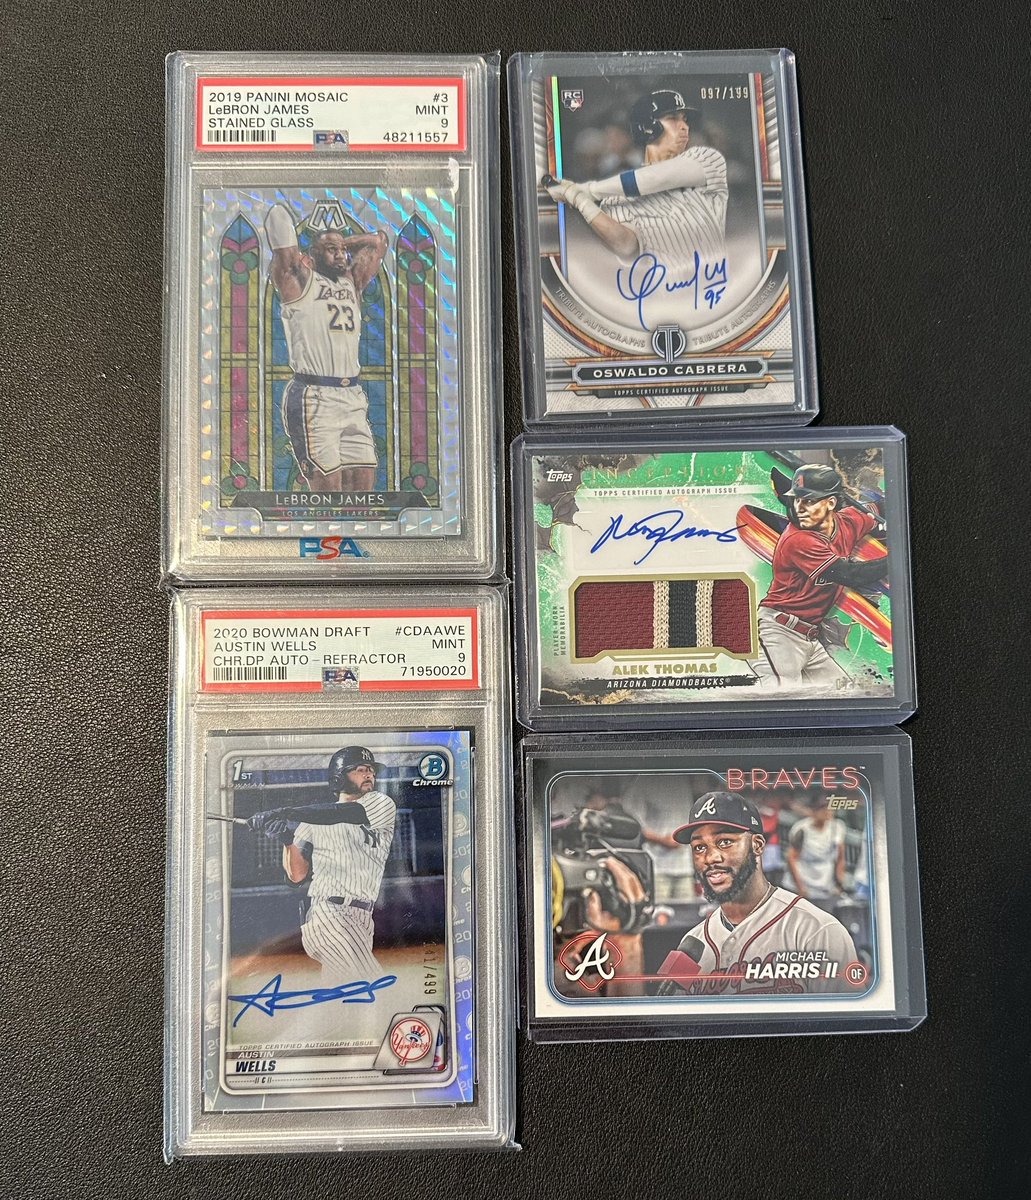 THURSDAY SALE🔥 LET’S MAKE SOME DEALS 🫡 RTS APPRECIATED @Hobby_Connect @sports_sell @CardboardEchoes @SportsSell3 @hiveretweets @thehobby247 @hobbyretweet_ @dailysportcards @stokesboyscards #cardconnection @ILOVECOLLECTIN1 #TBBCrew